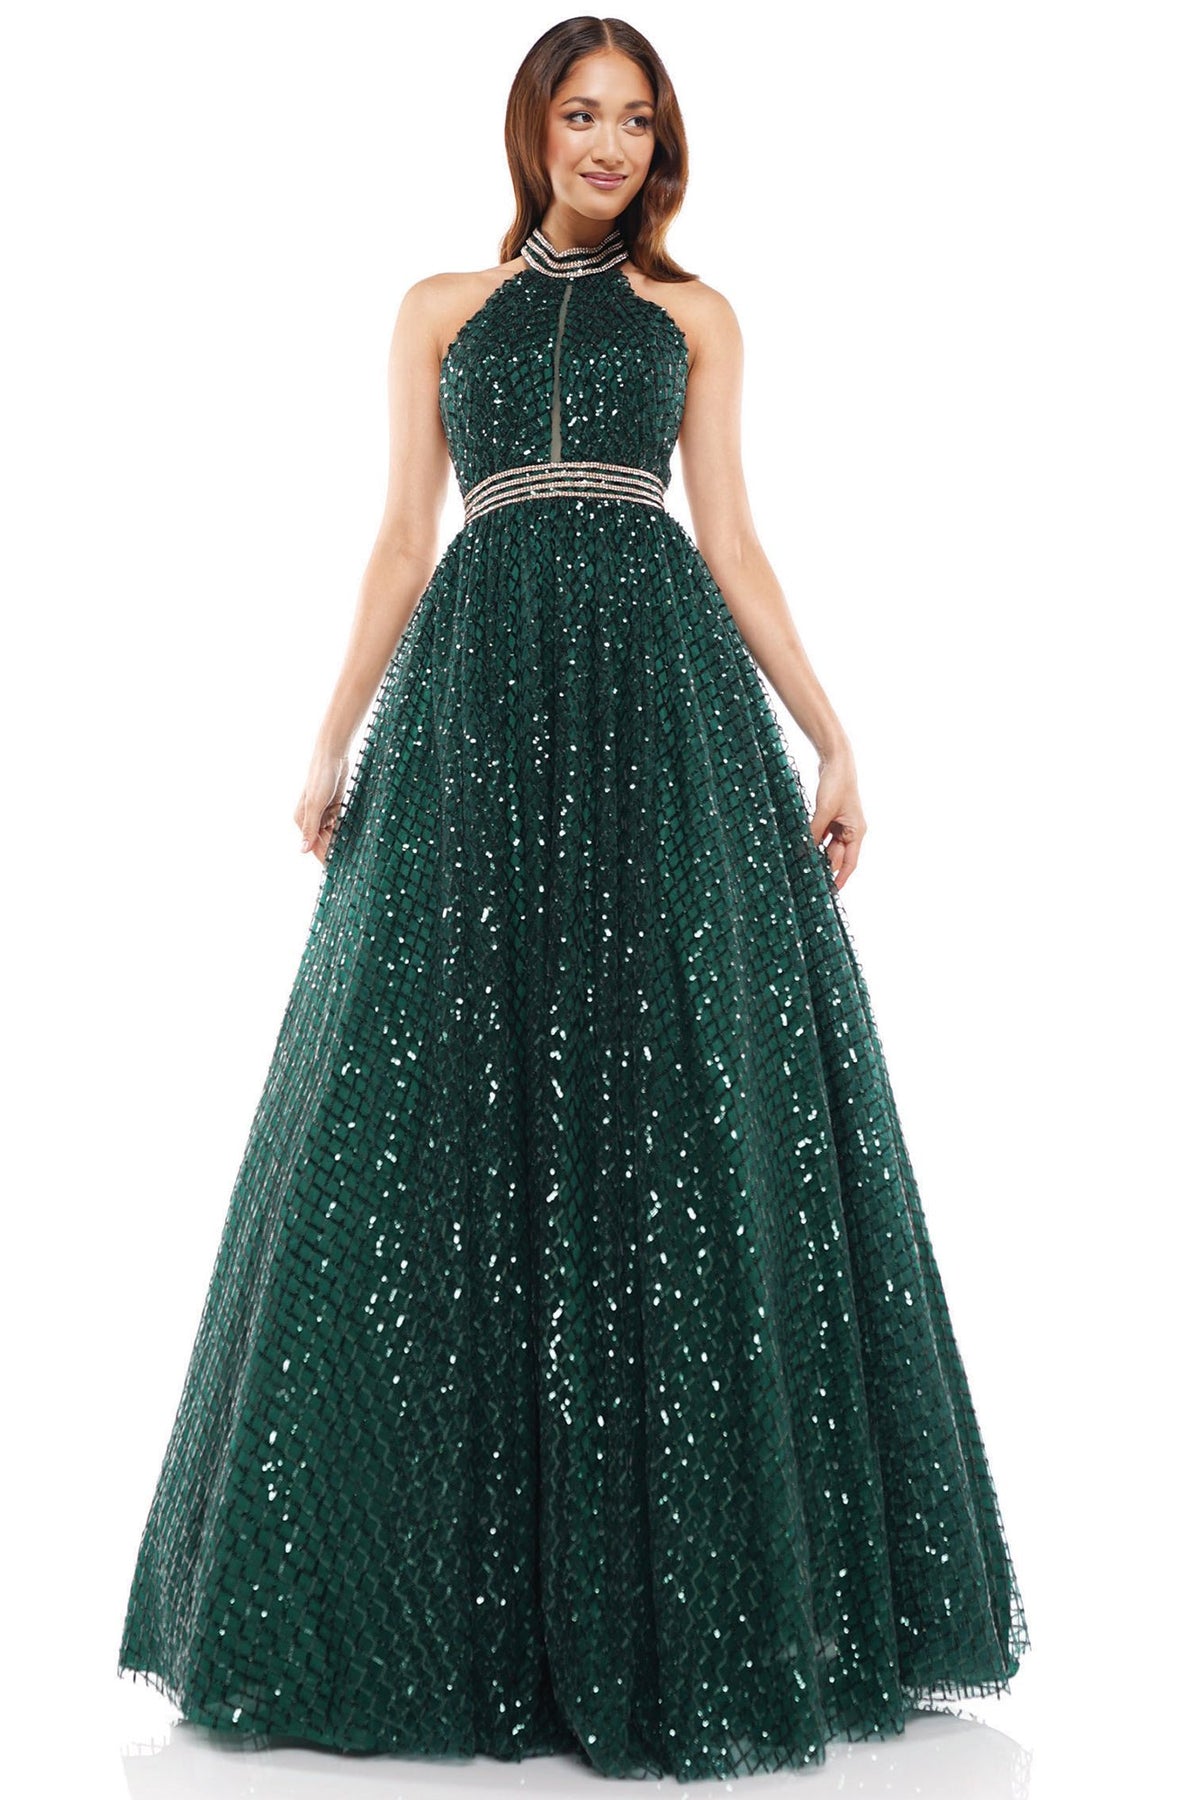 Glow Dress - G916 High Halter Sequined Lattice A-Line Gown In Green